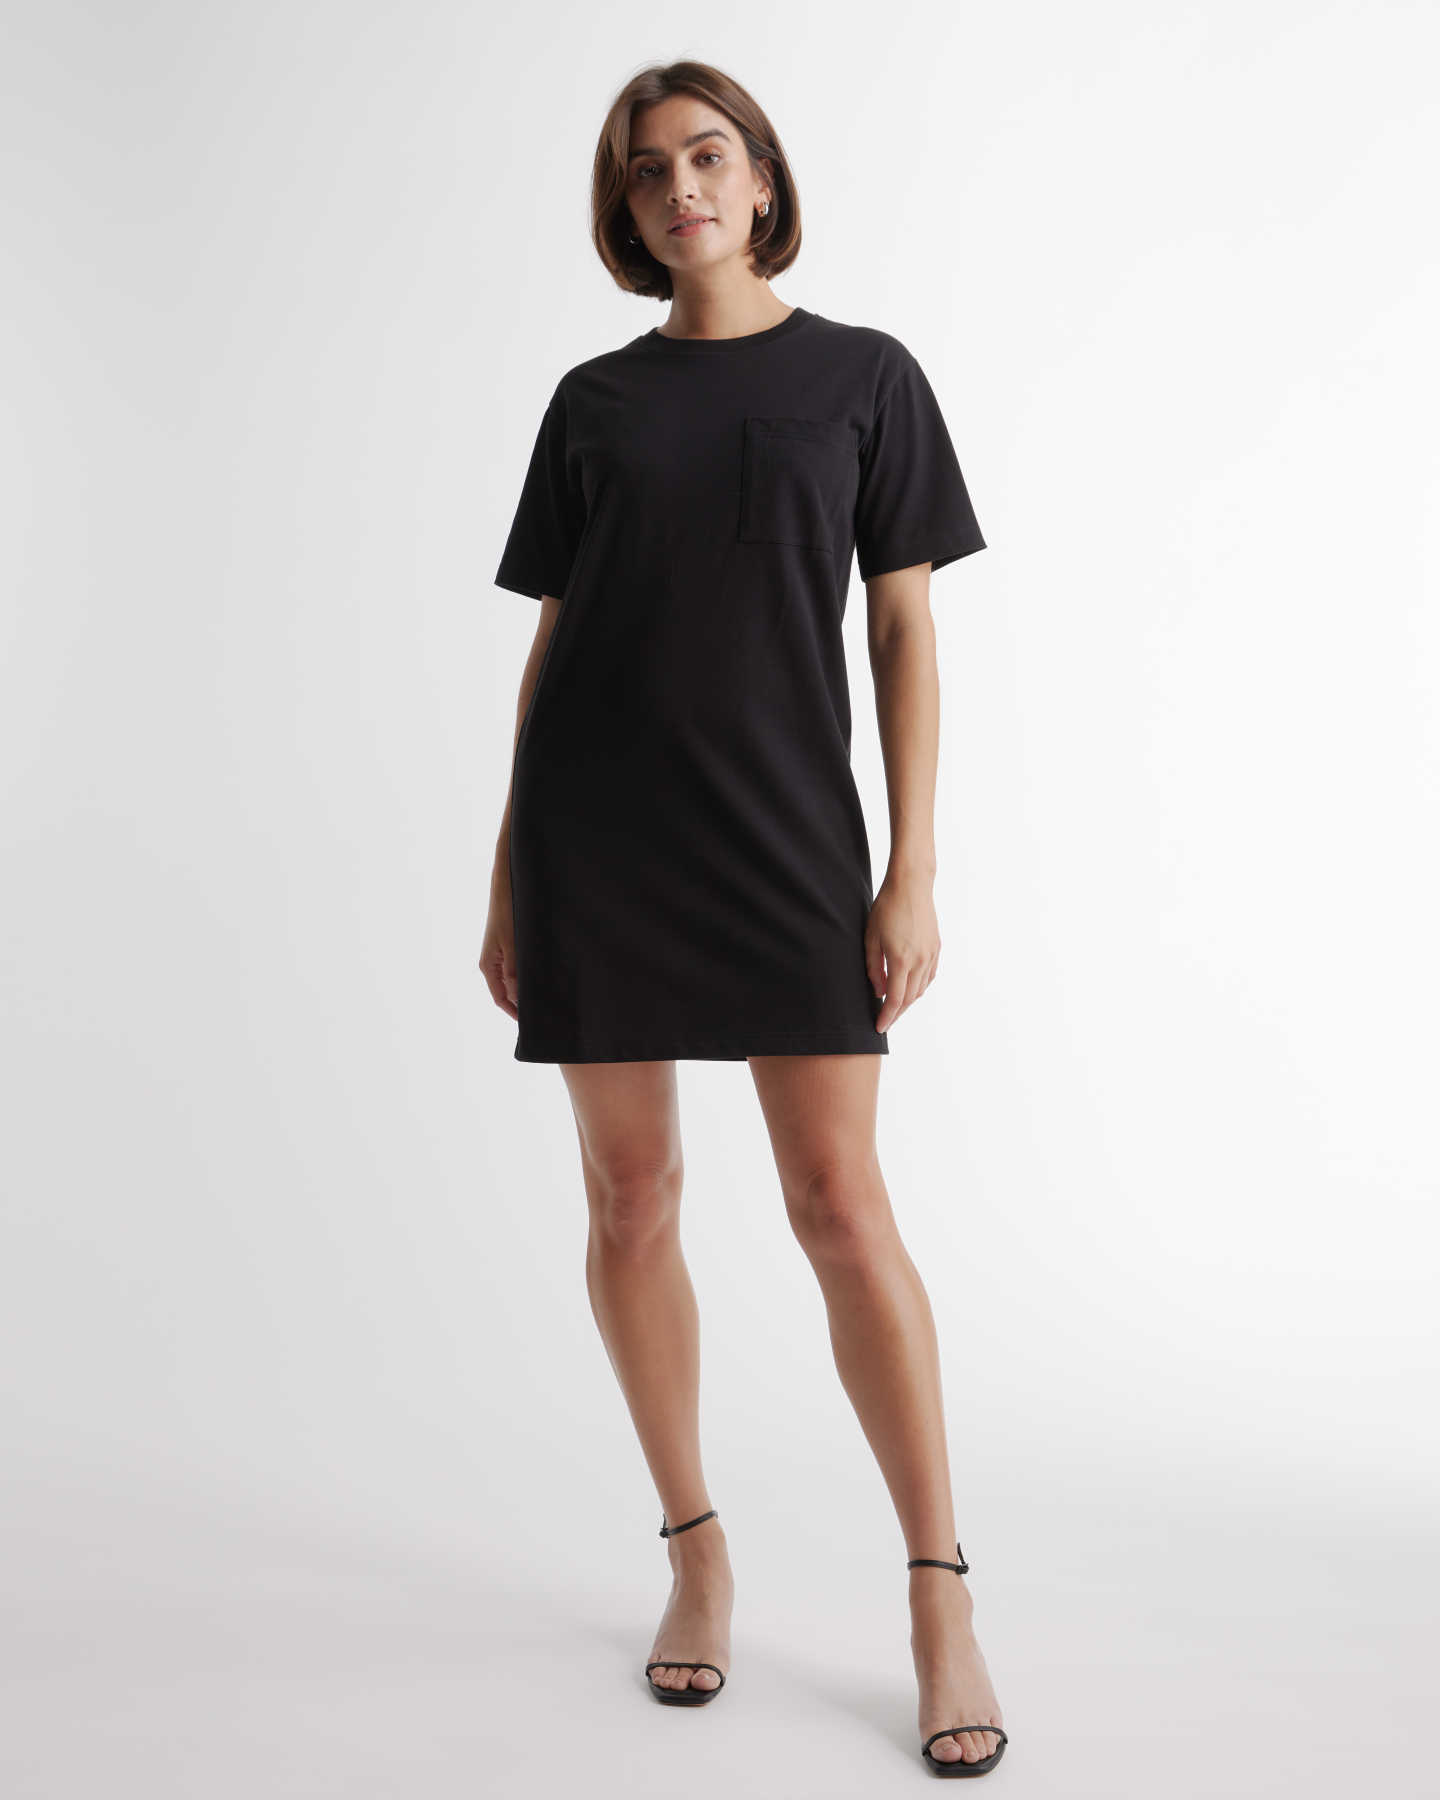 You May Also Like - 100% Organic Cotton Relaxed T-Shirt Dress - Black